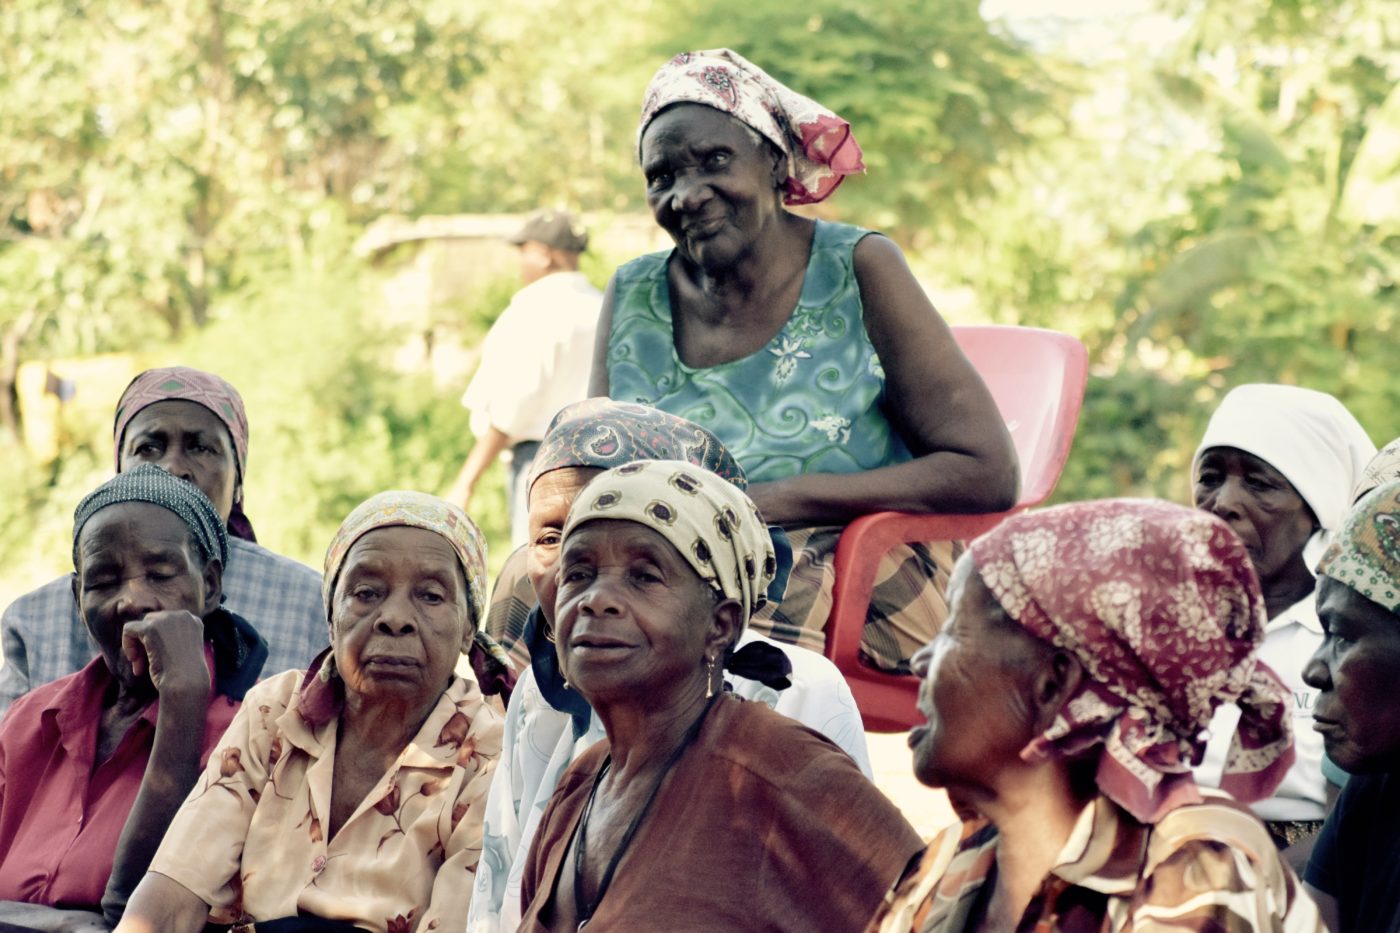 Sensitizing Health Workers to the Needs of the Elderly in Mozambique